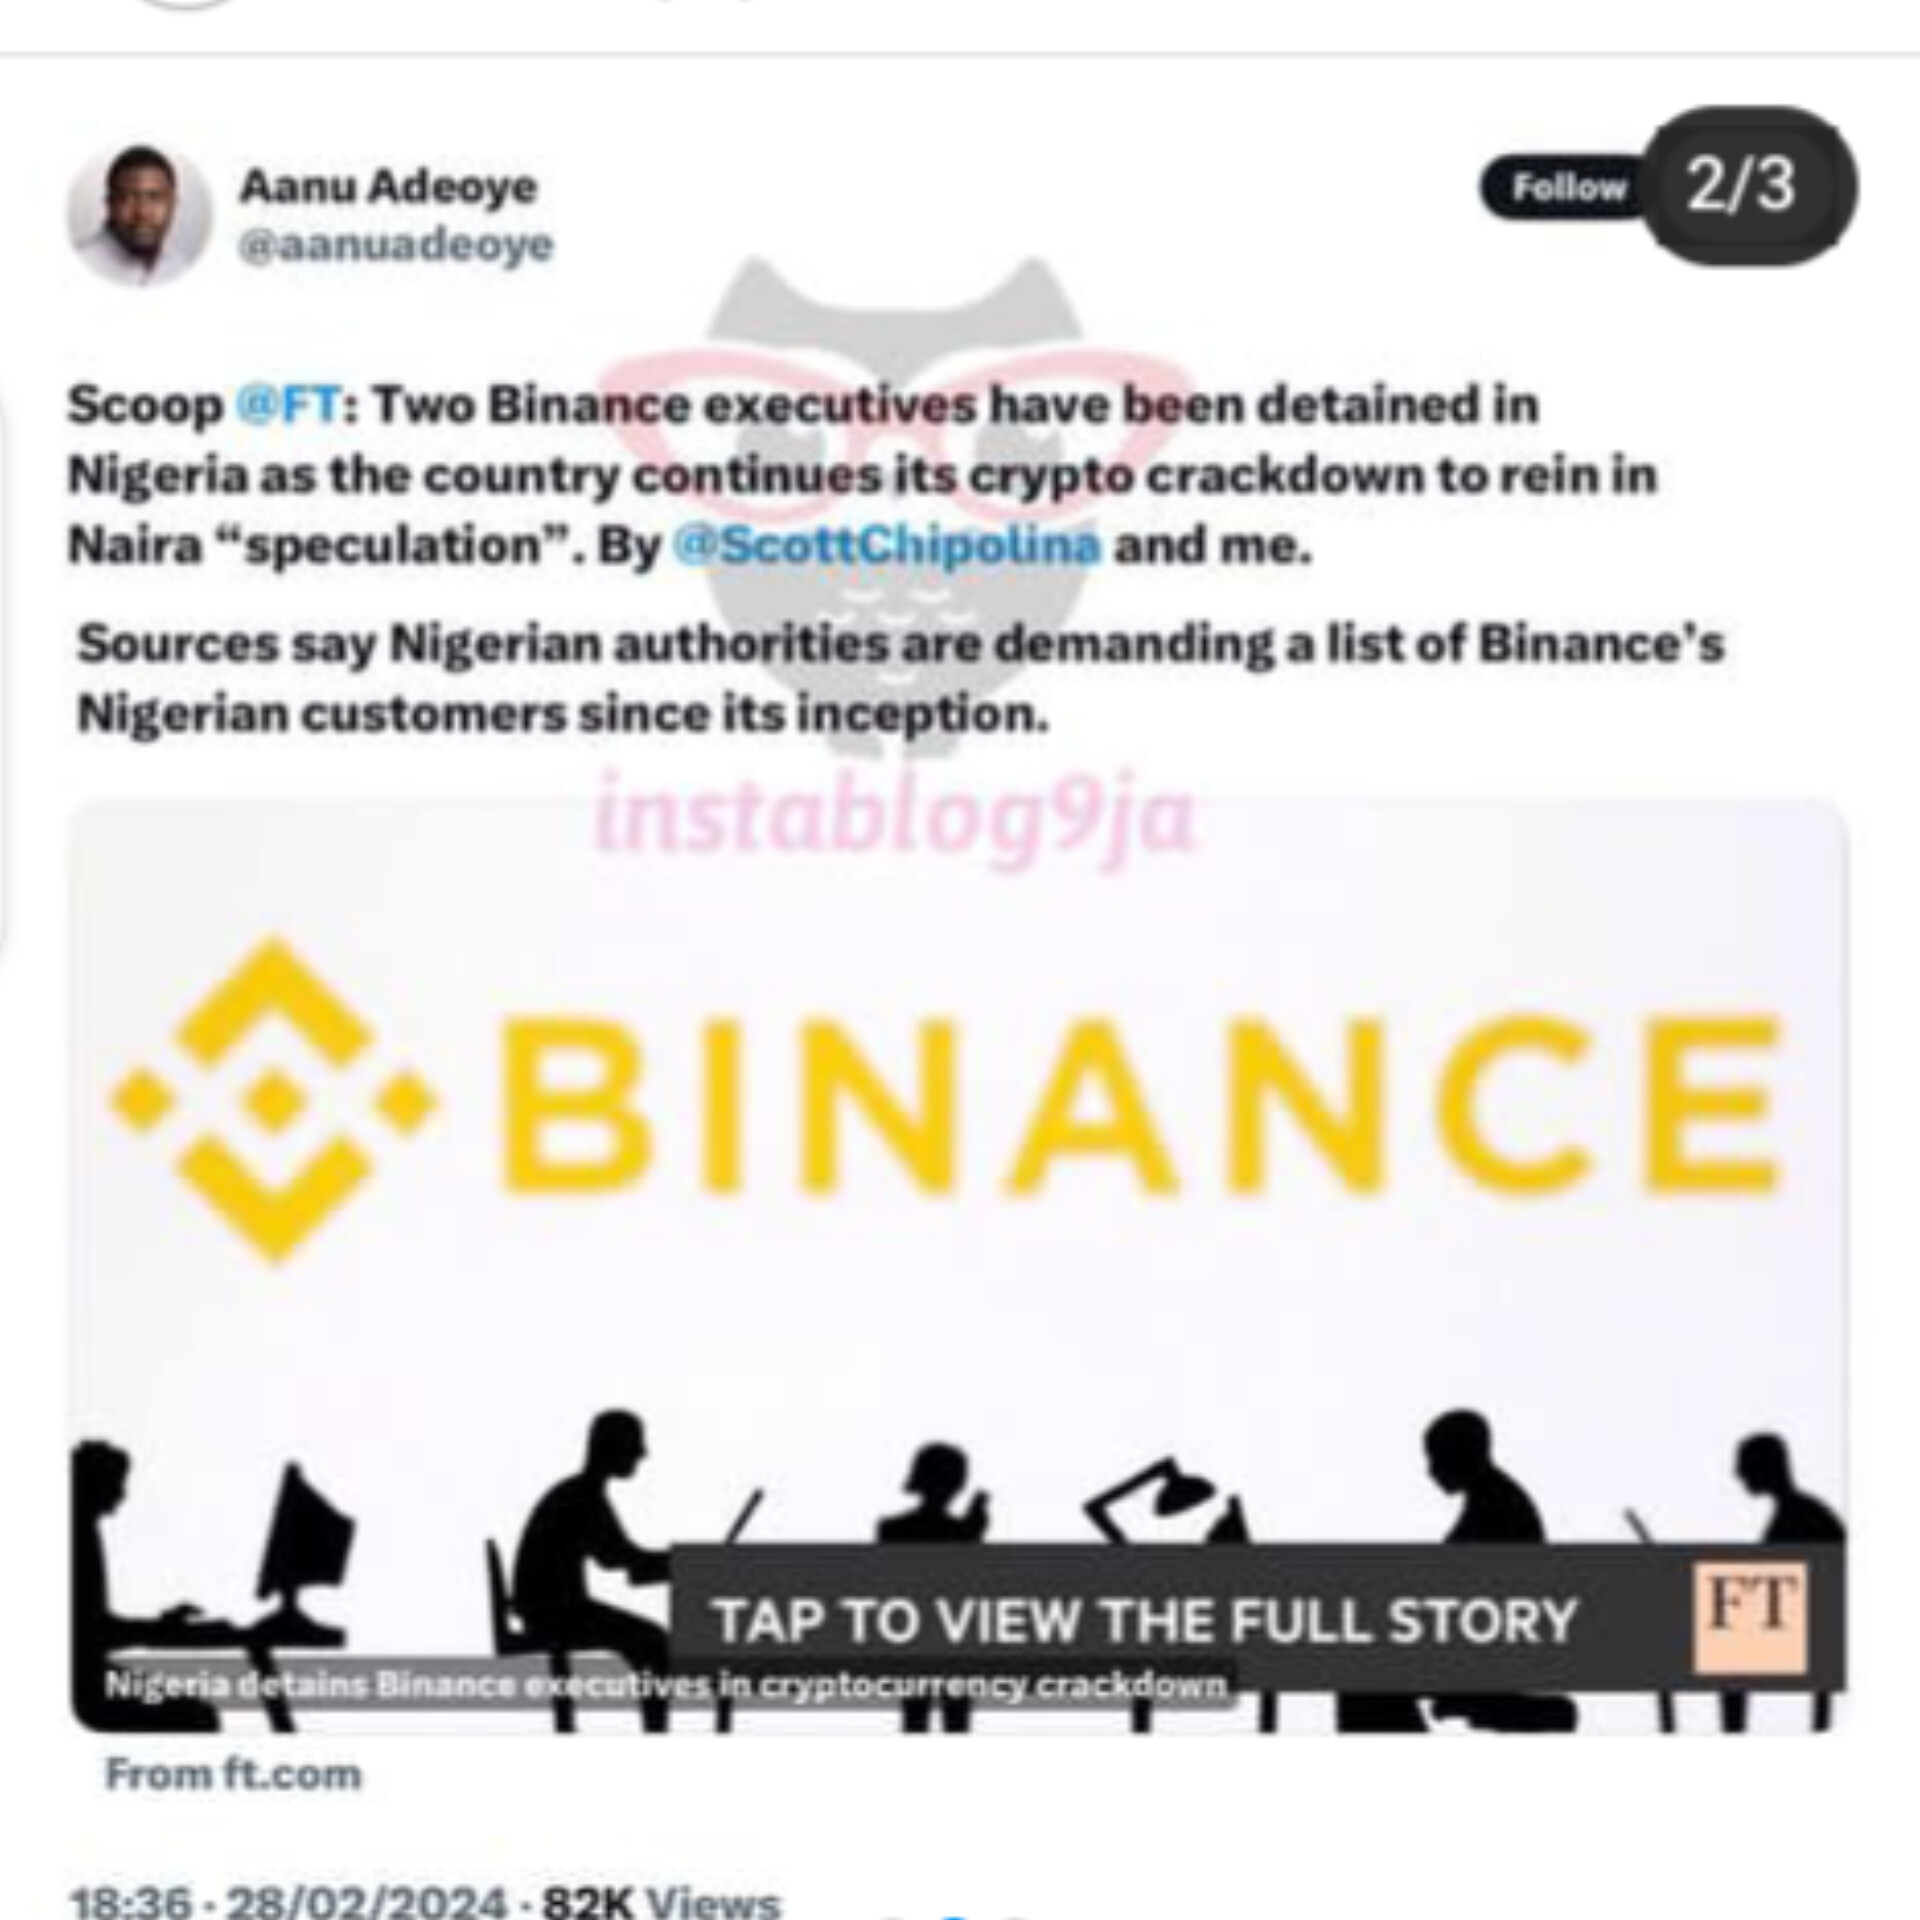 FG detains two Binance officials